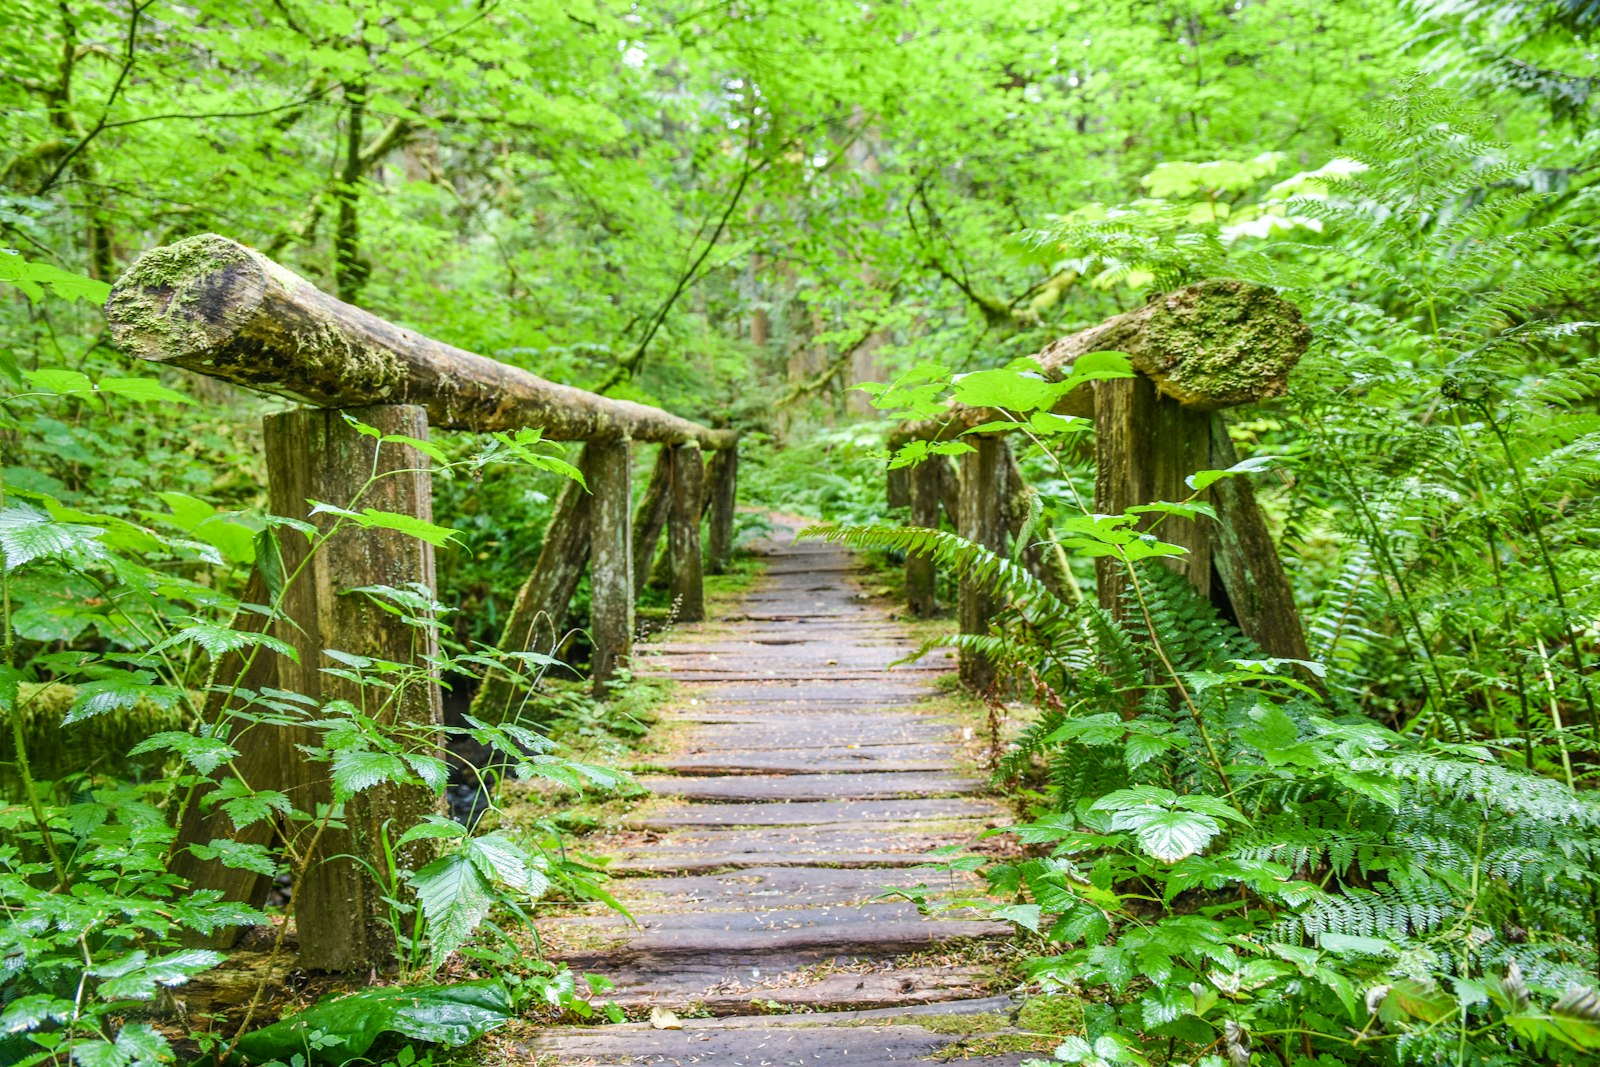 Wooden bridge in a heavily forested area